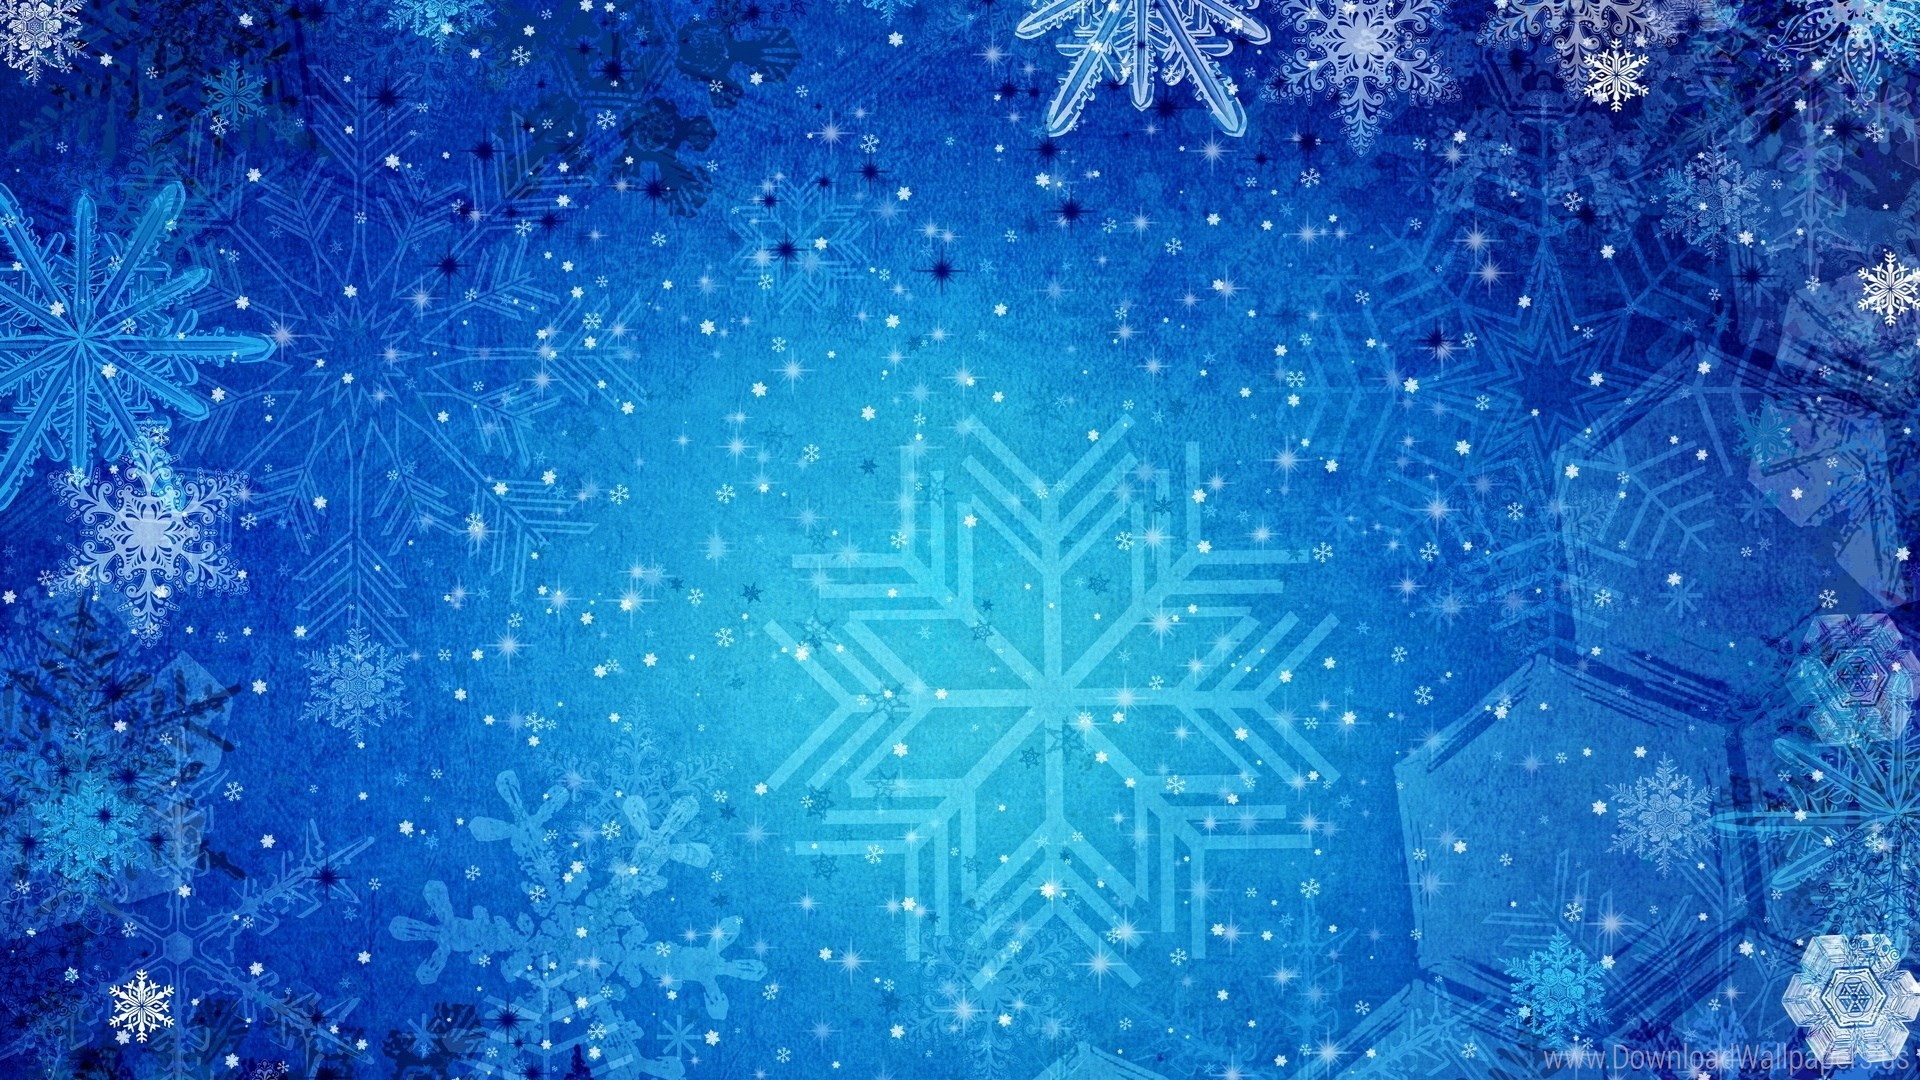 1920x1080 Download Widescreen 16:9  - Blue, Patterns, Snowflakes Wallpaper